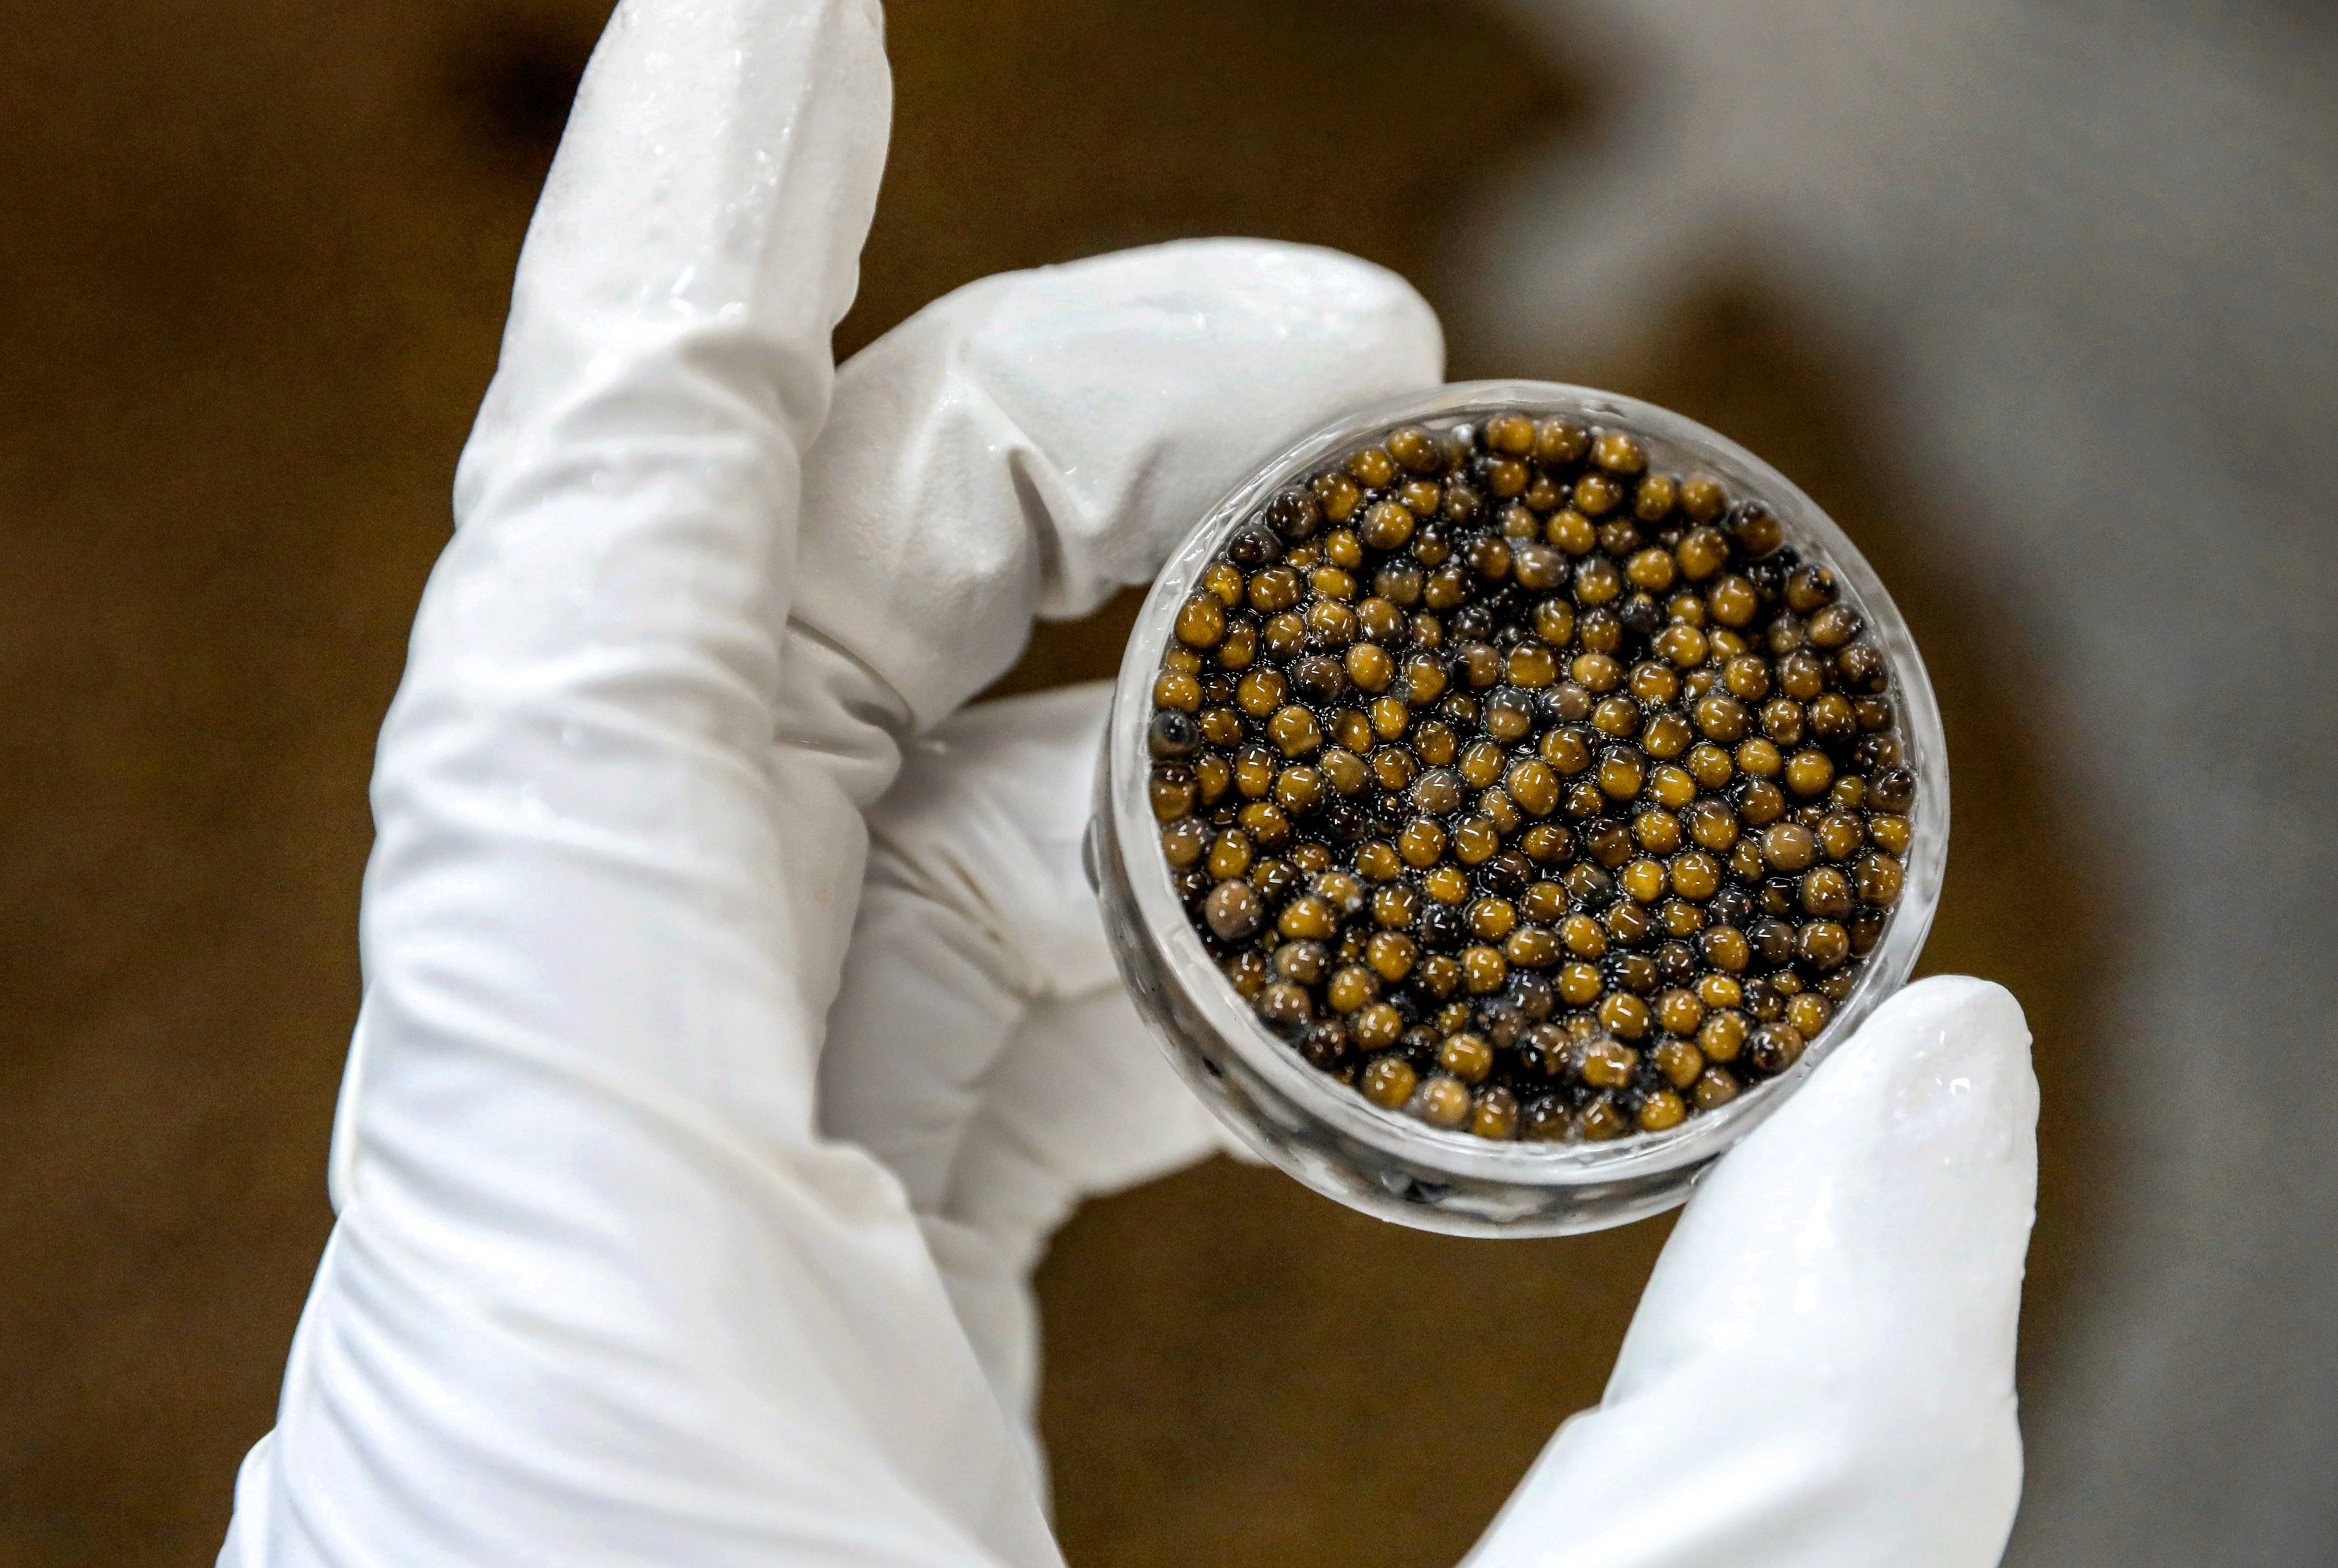 The color and quality of caviar is checked at a Kaluga Queen production facility in China’s Zhejiang province. Photo: Simon Song